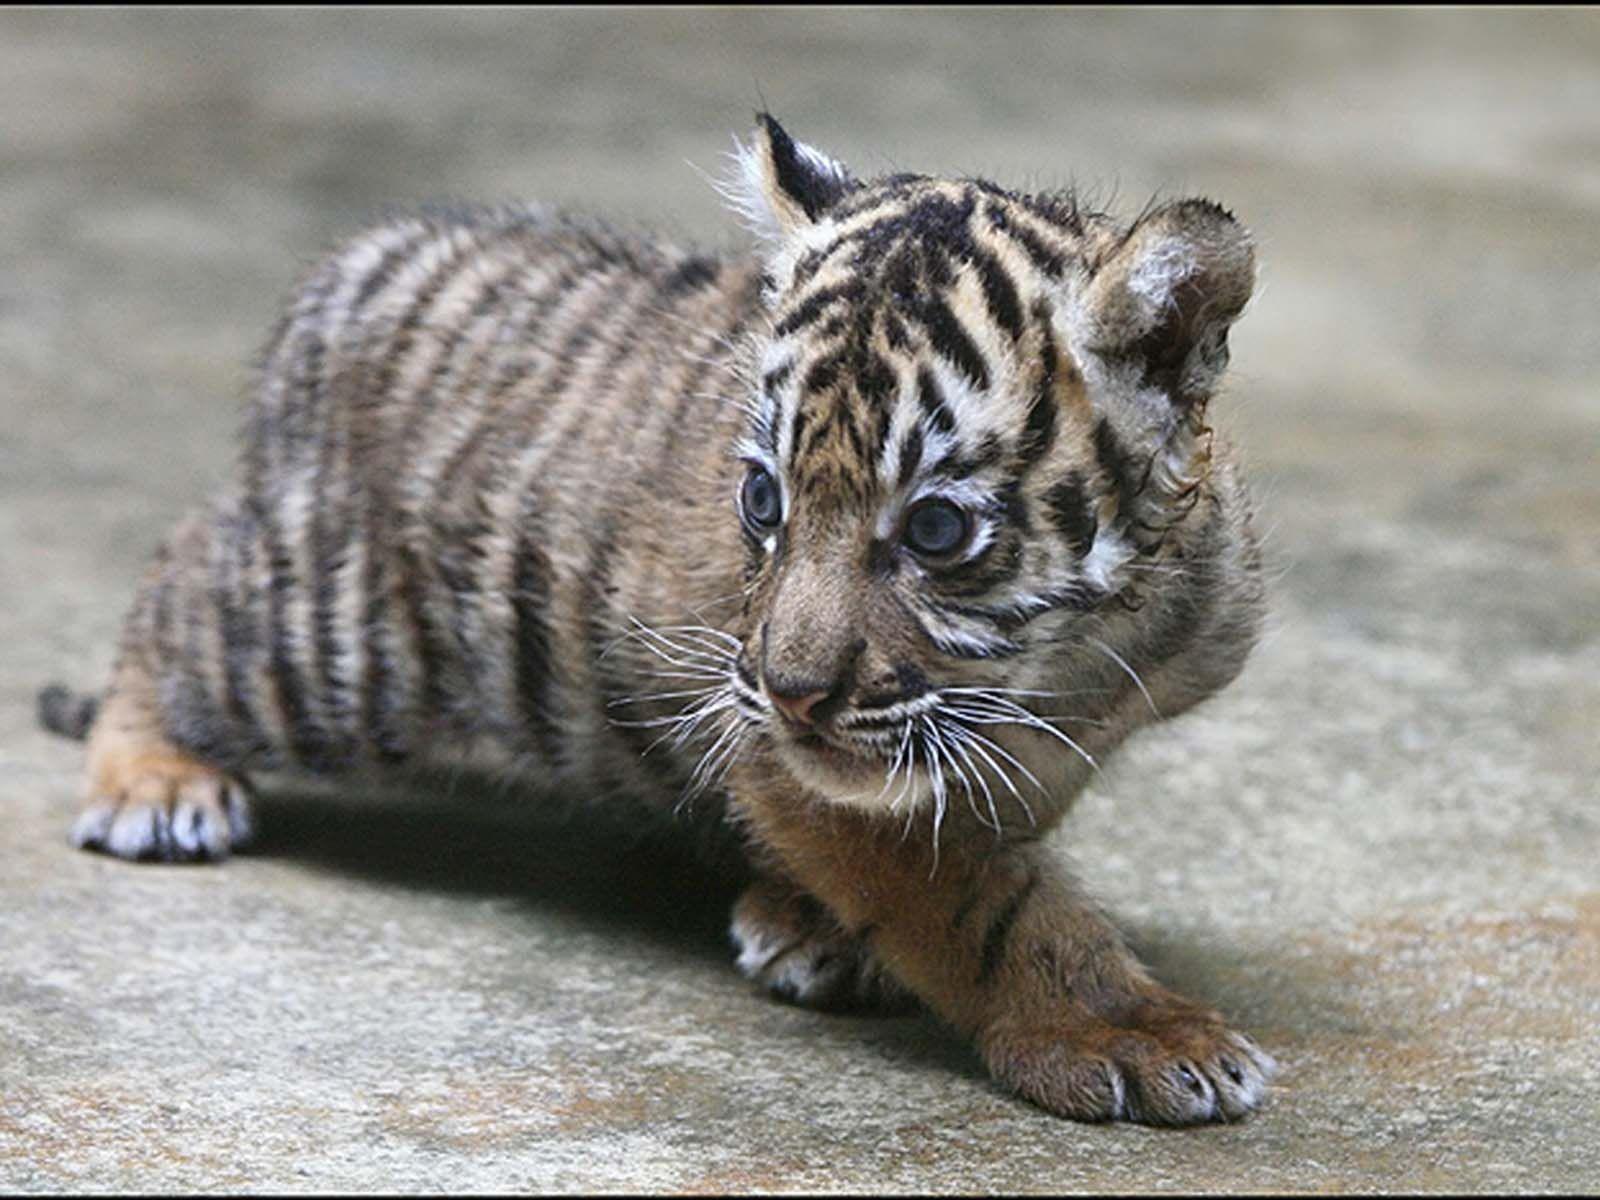 Tiger Babies. Places to Visit. Baby tigers, Cute baby animals, Animals